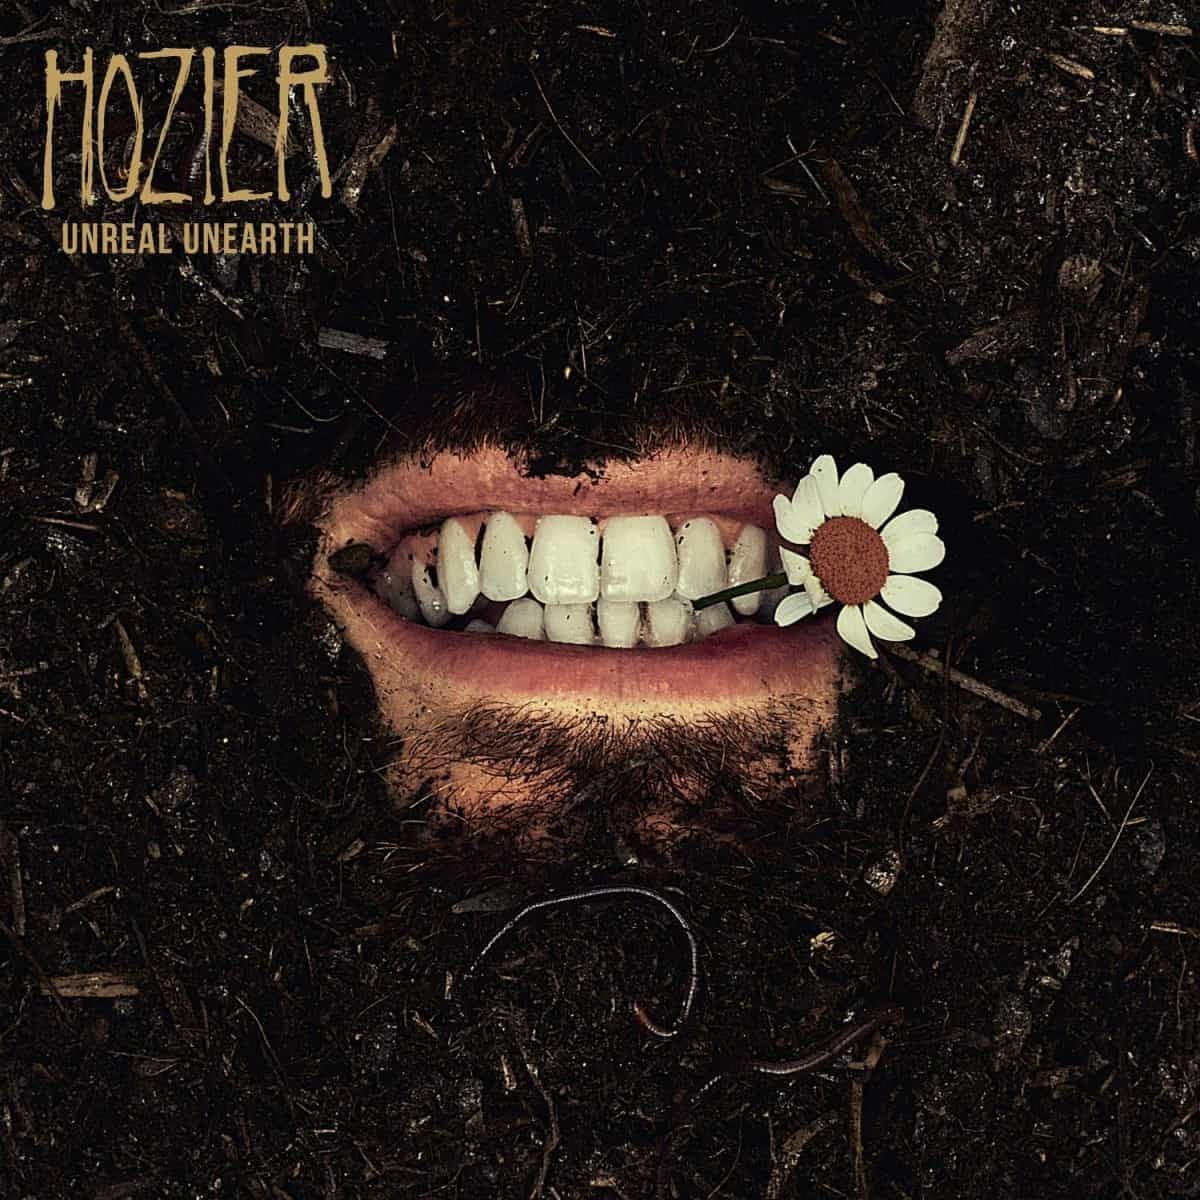 Buried under: Hozier in his cover art for new album ‘Unreal Unearth'